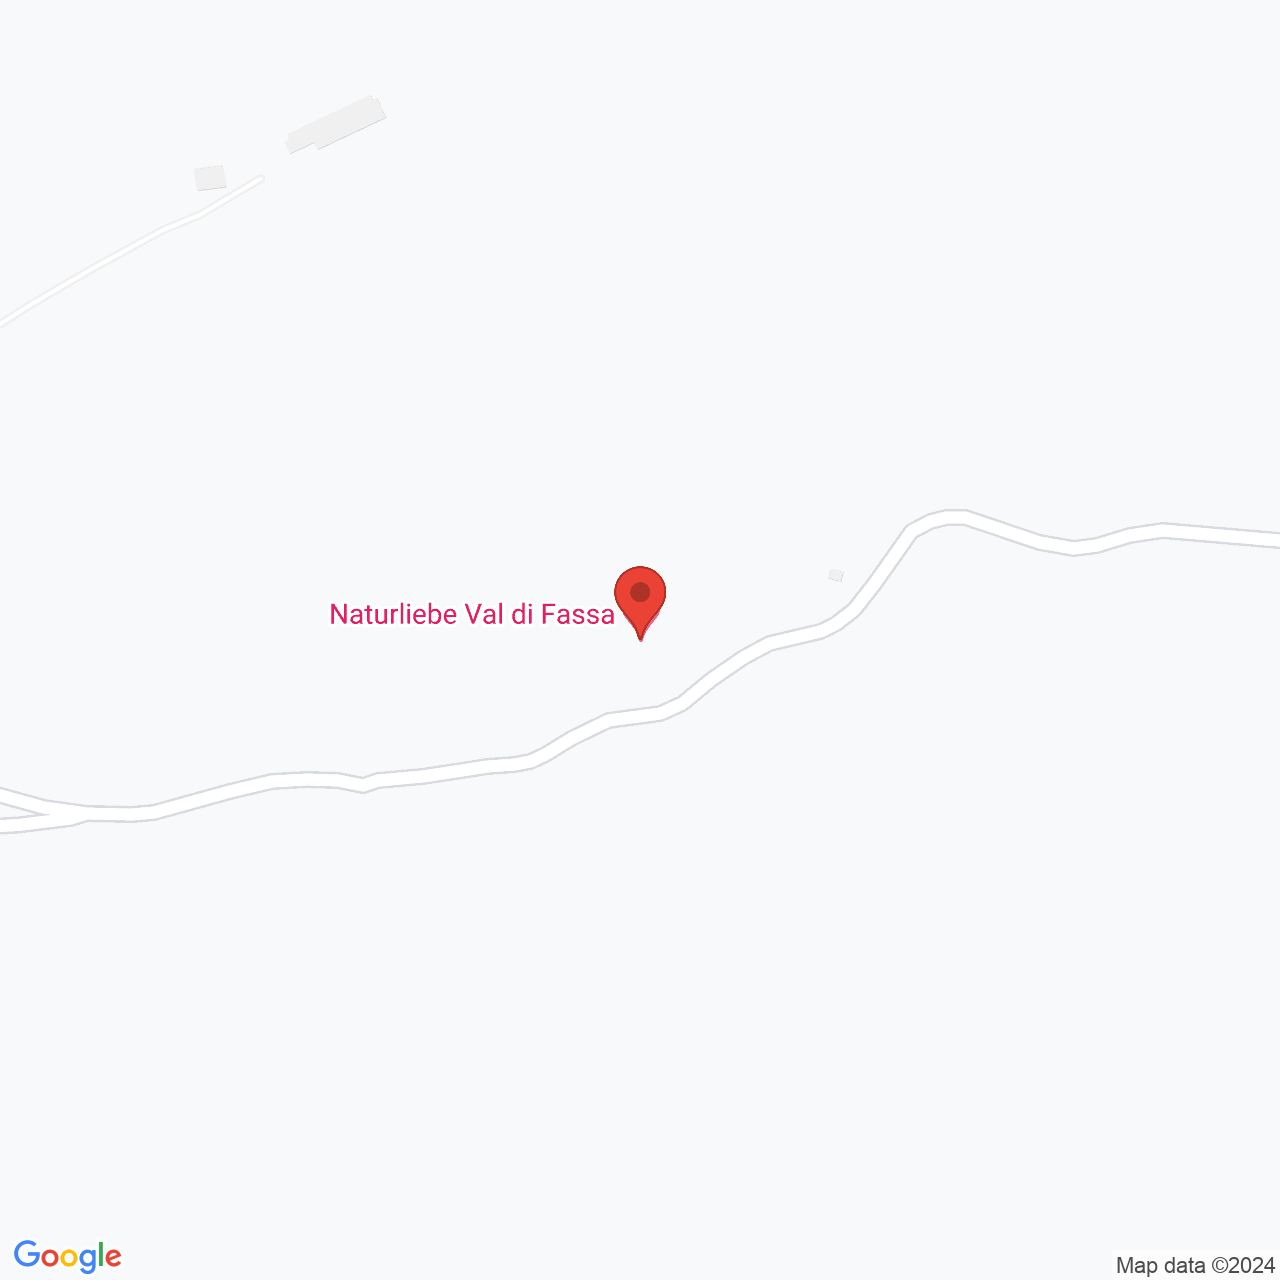 https://maps.googleapis.com/maps/api/staticmap?zoom=10&maptype=hybrid&scale=4&center=46.4907862,11.7123873&markers=color:red%7C%7C46.4907862,11.7123873&size=1000x1000&key=AIzaSyAQg6Liu52-a7wn17F9B-5c4QmJ9kTO3Mo